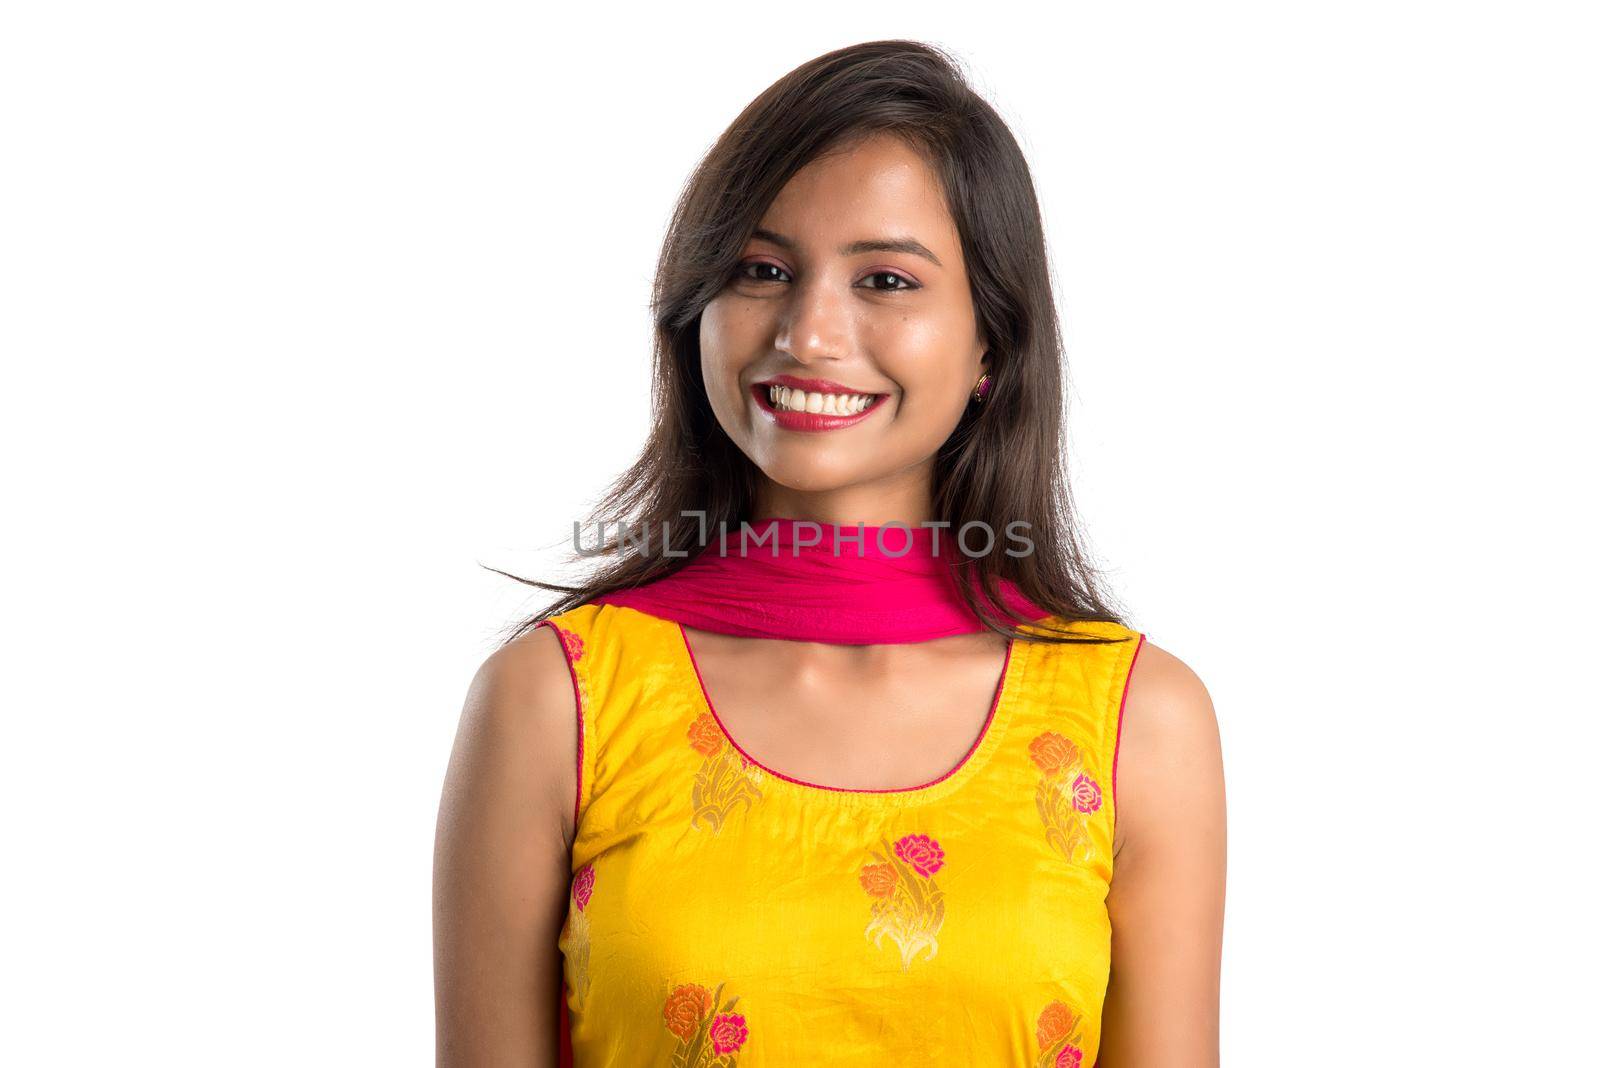 Portrait of beautiful young smiling girl on a white background.